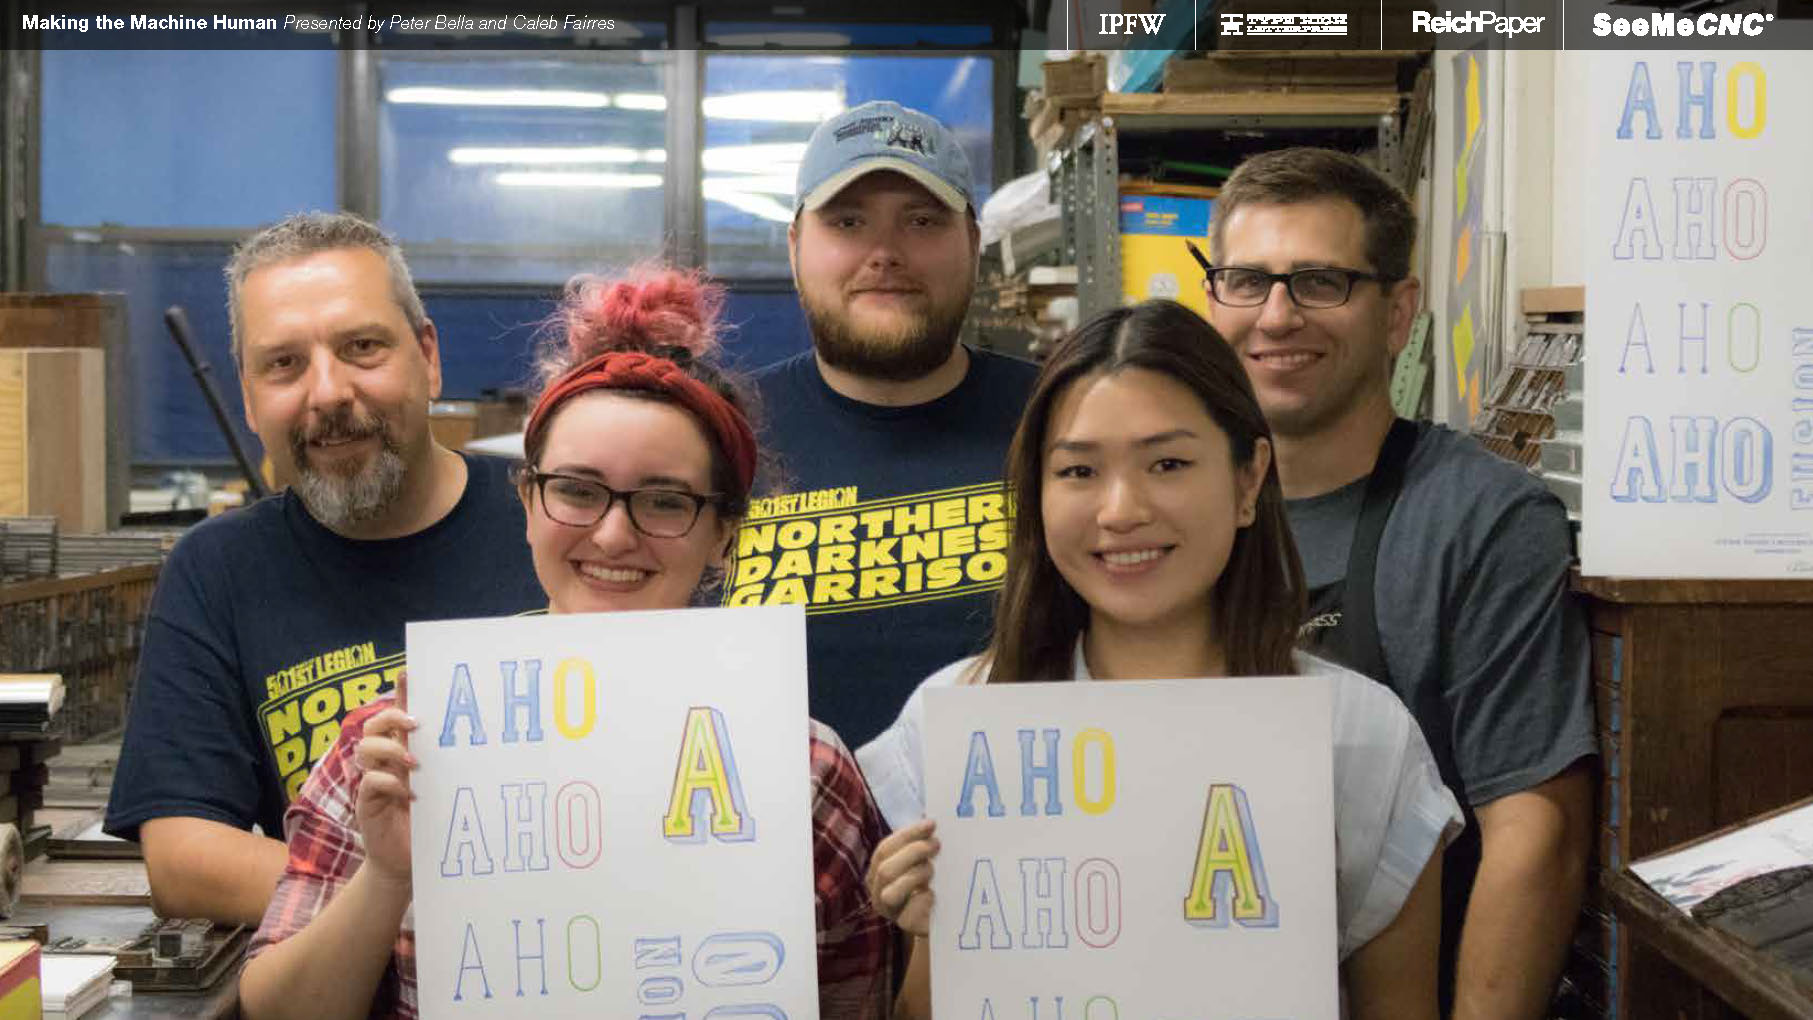  Huge shout out to  SeeMeCNC ,&nbsp; Reich Paper ,  Type High Letterpress , and the Type High interns for all the hard work and support on this project! 